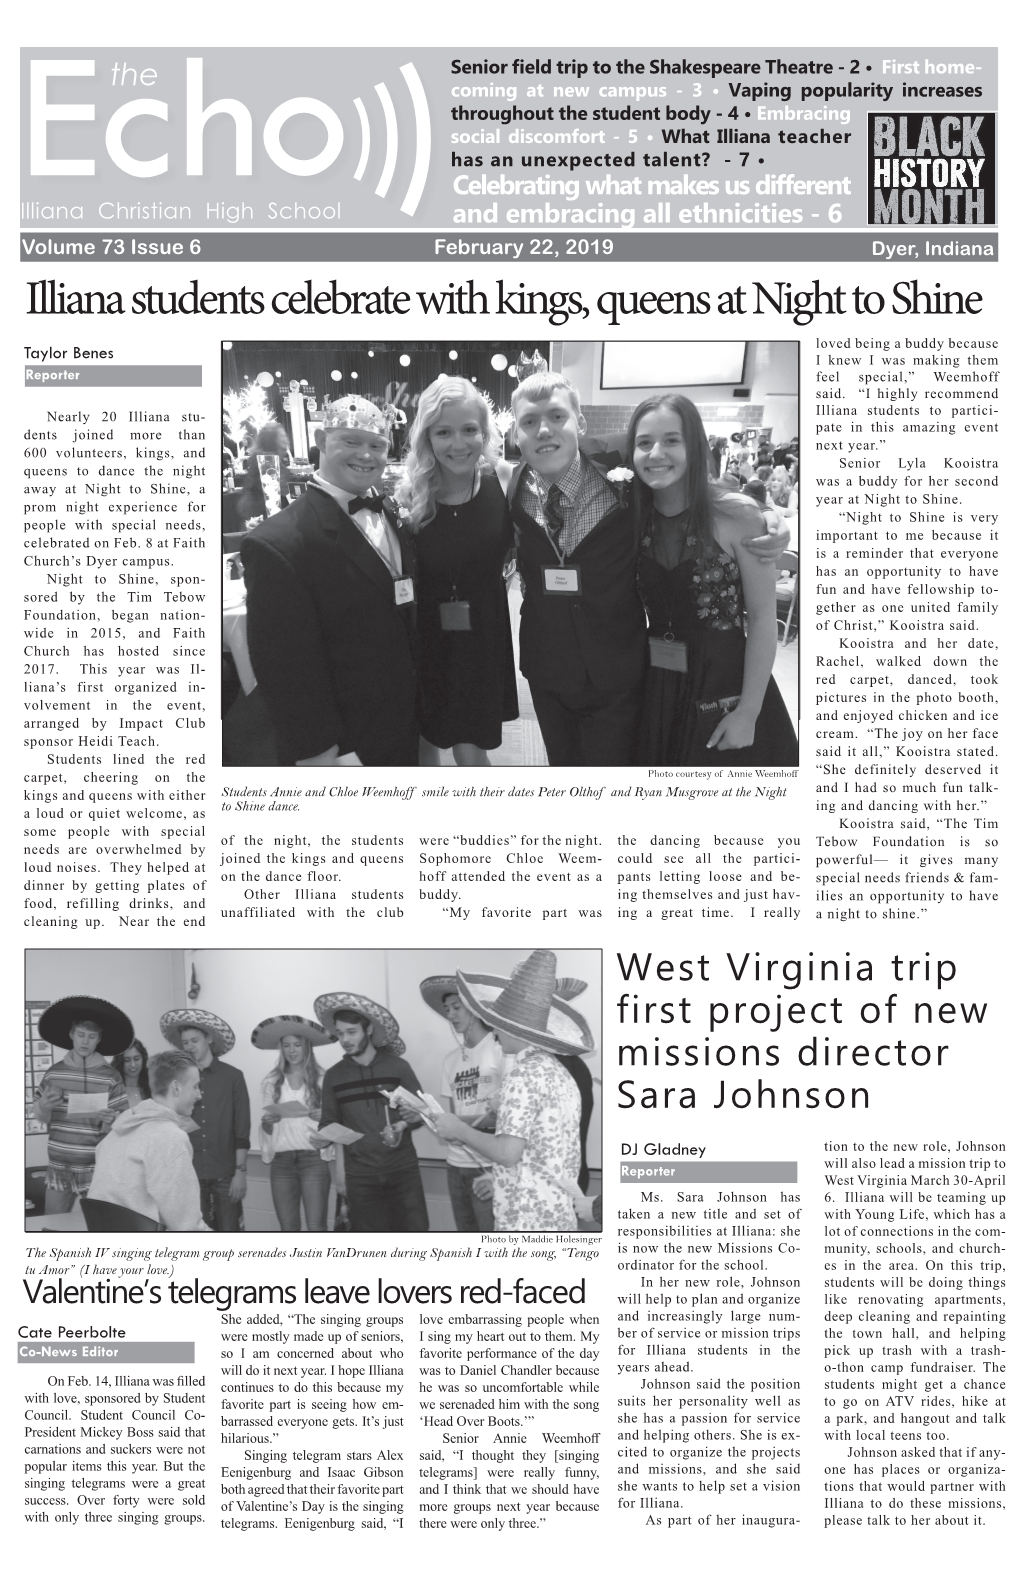 Illiana Students Celebrate with Kings, Queens at Night to Shine